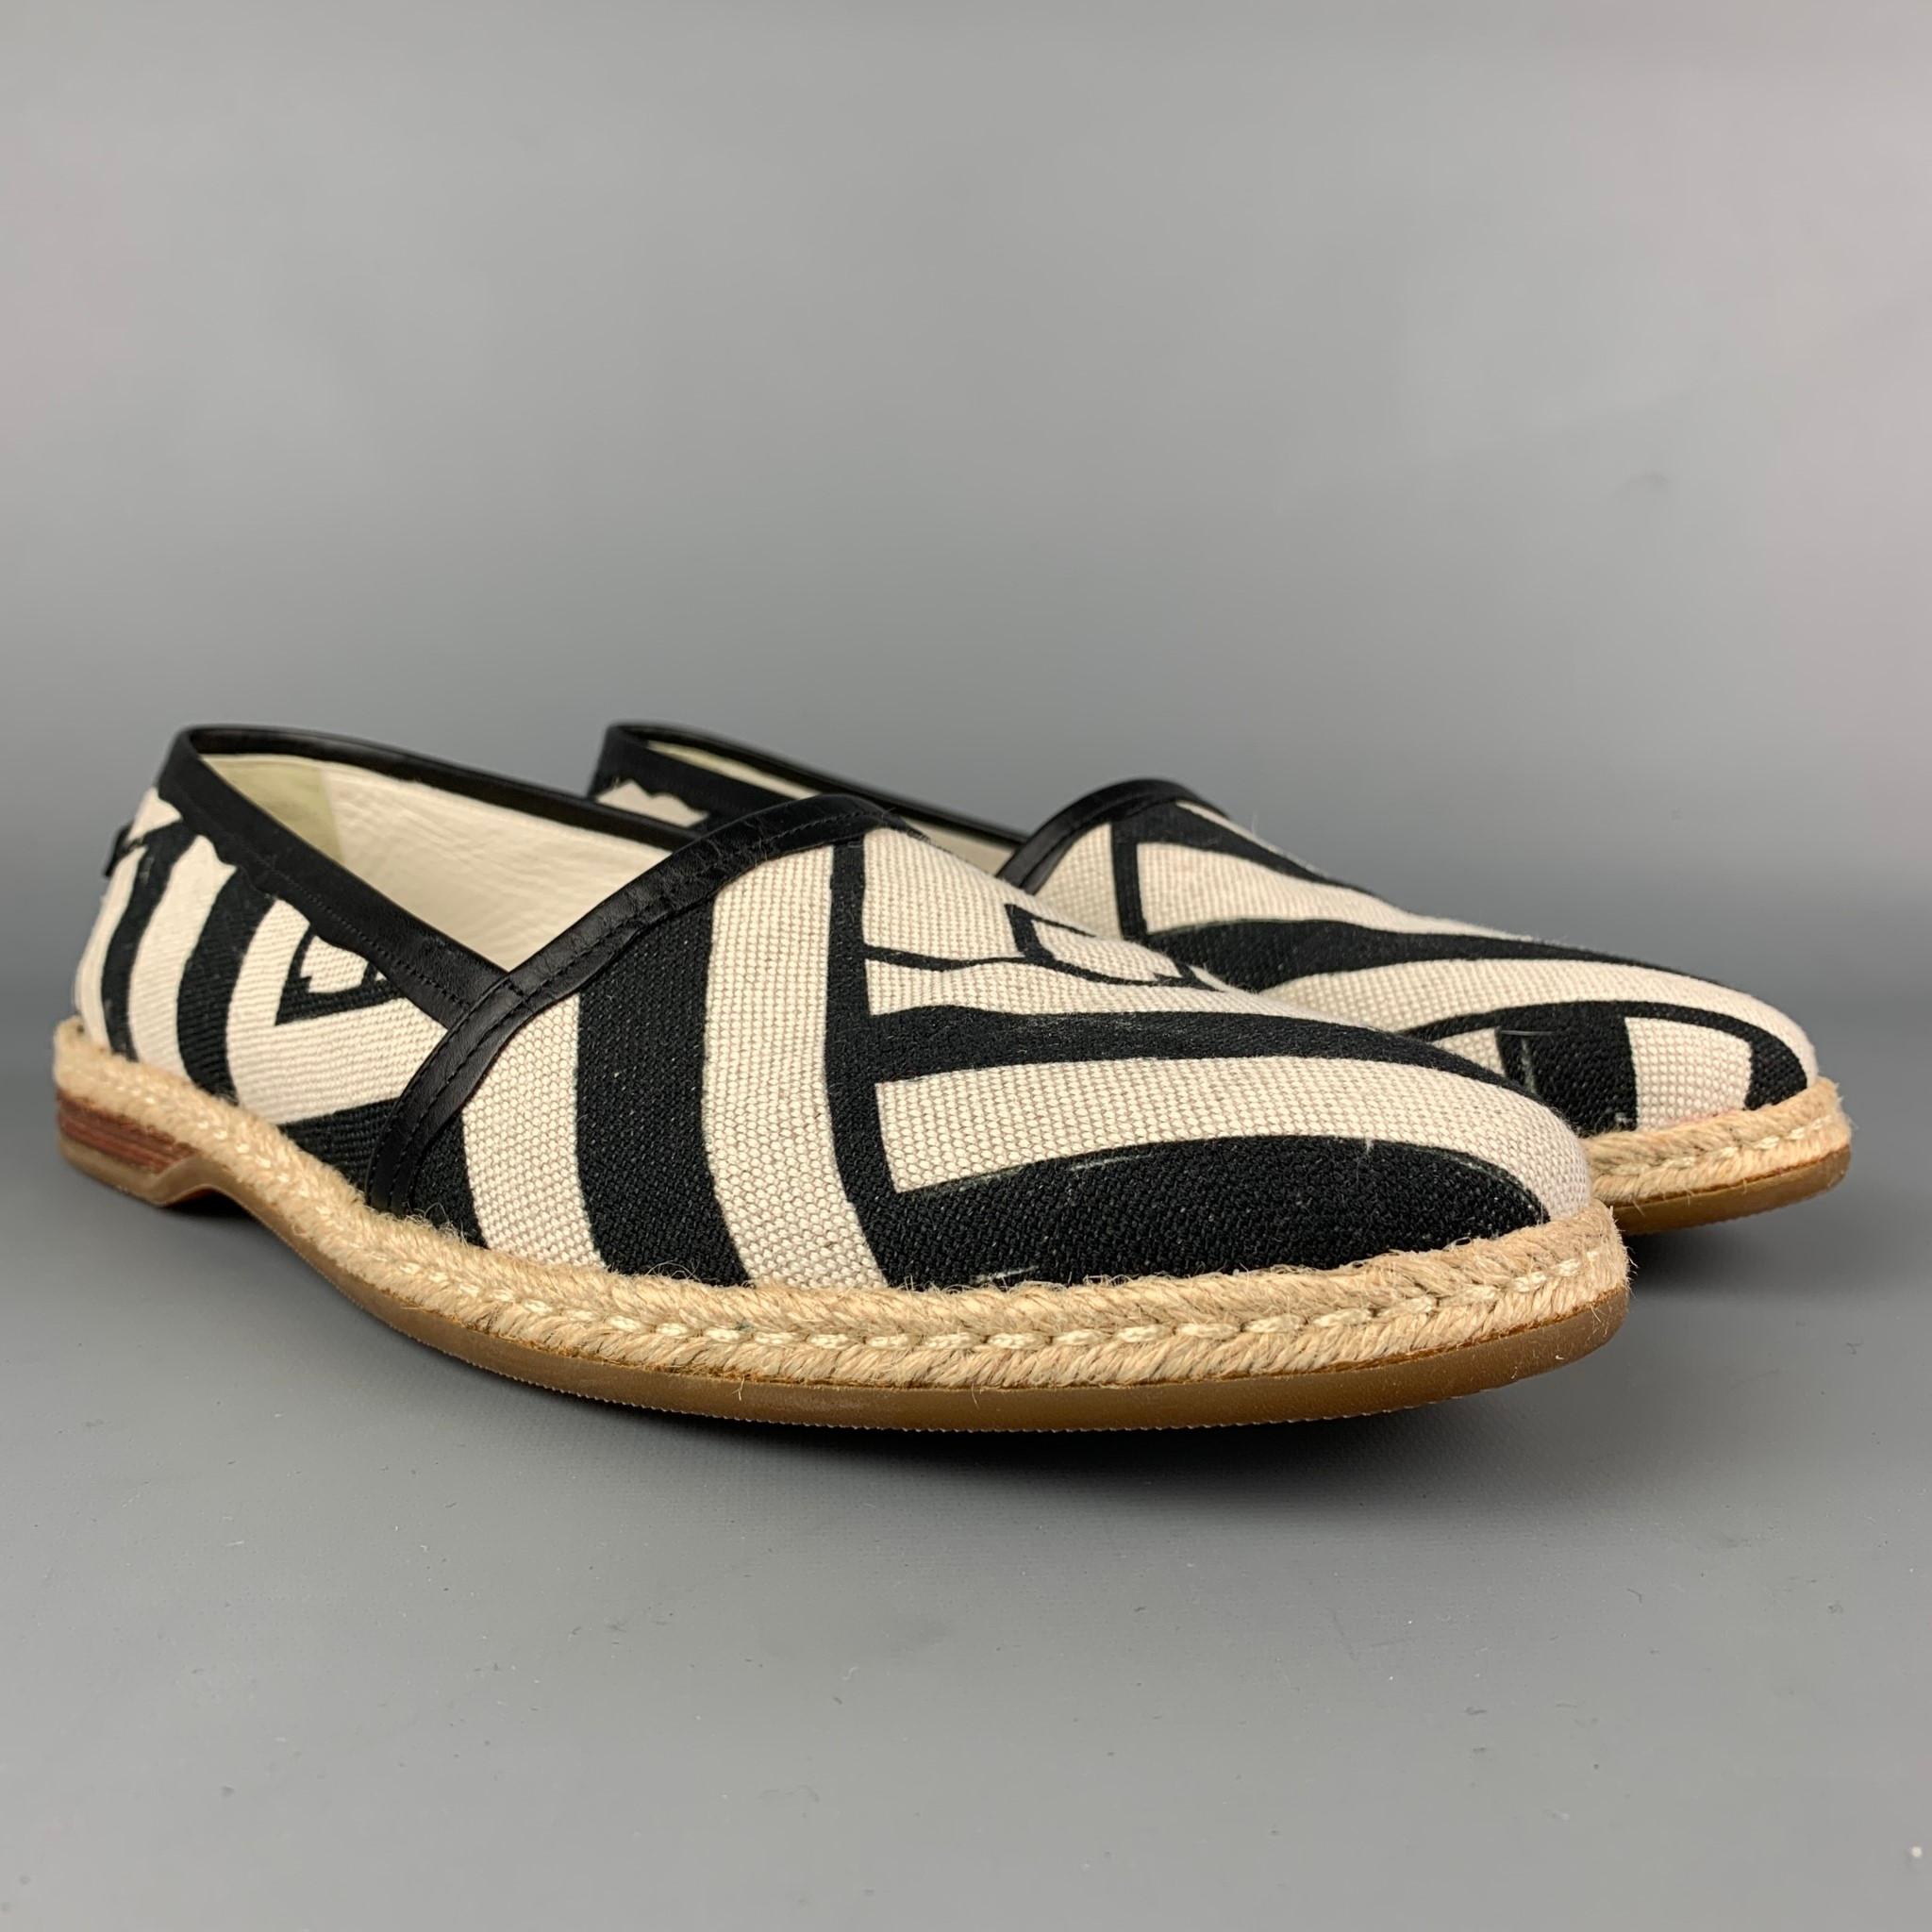 DOLCE & GABBANA loafers comes in a off white & black stripe canvas featuring a slip on style, rope trim, and a rubber sole. Made in Italy. 

Very Good Pre-Owned Condition.
Marked: A50039 8
Original Retail Price: $405.00

Outsole: 11.75 in. x 4 in. 